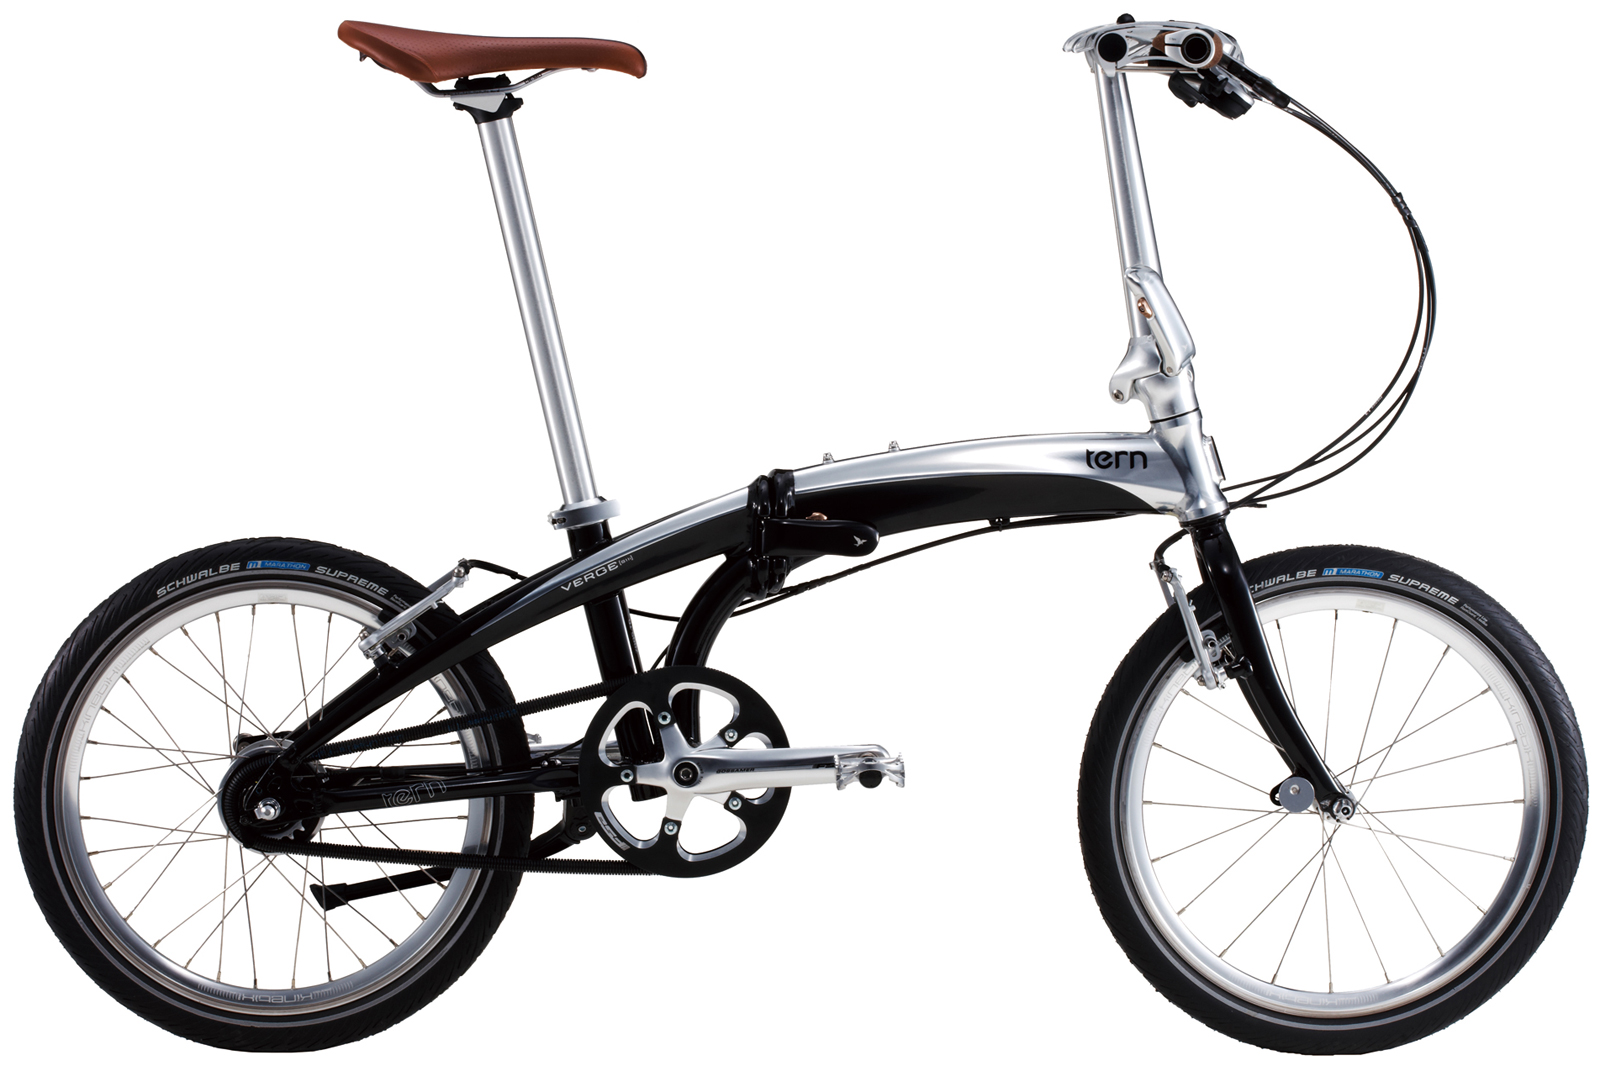 Tern Bicycles Japan Official Blog: 2012.01